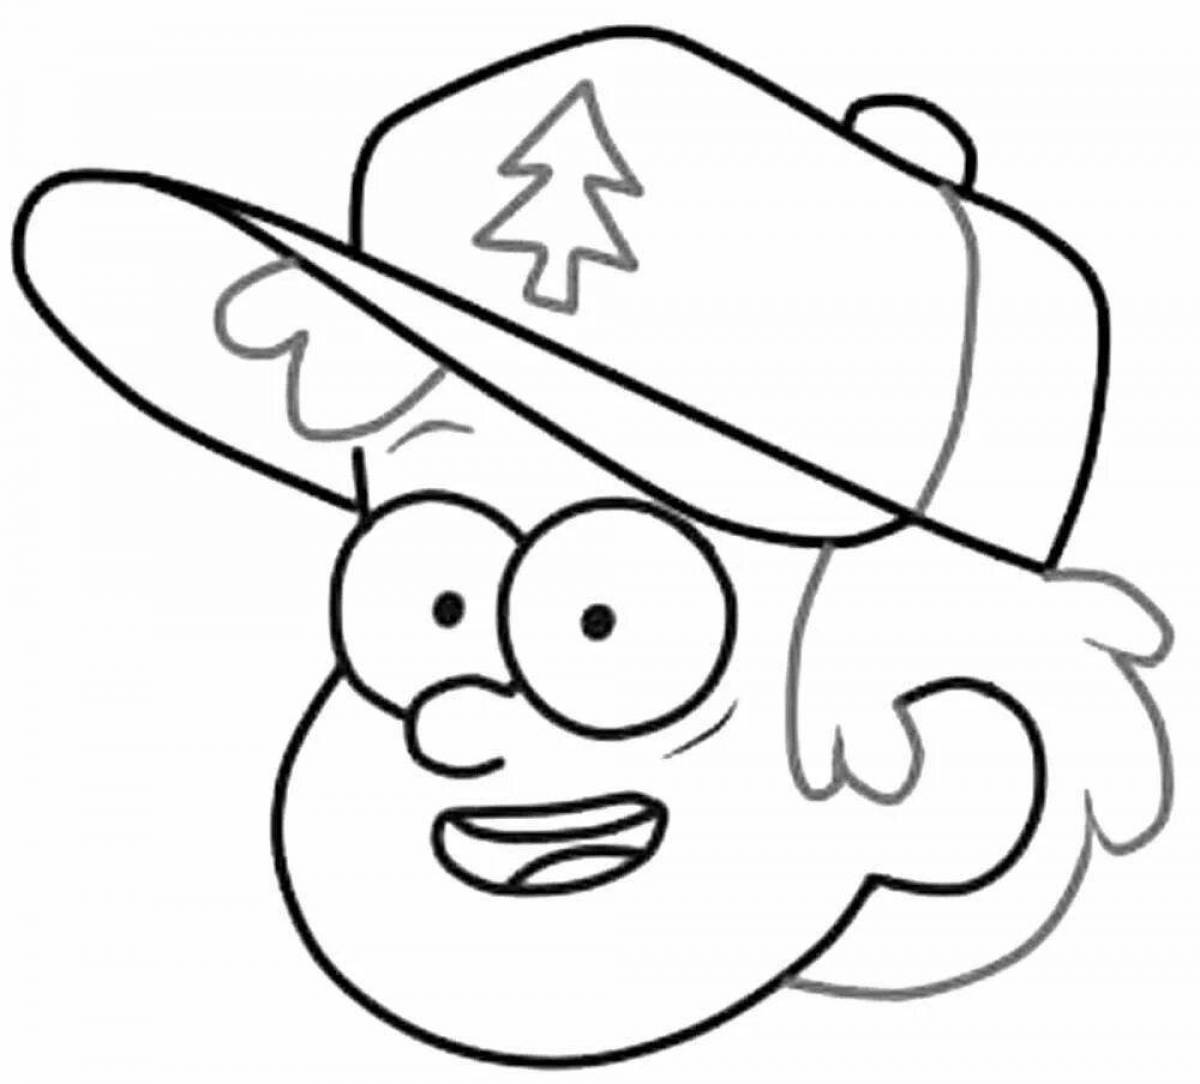 Bright dipper from gravity falls